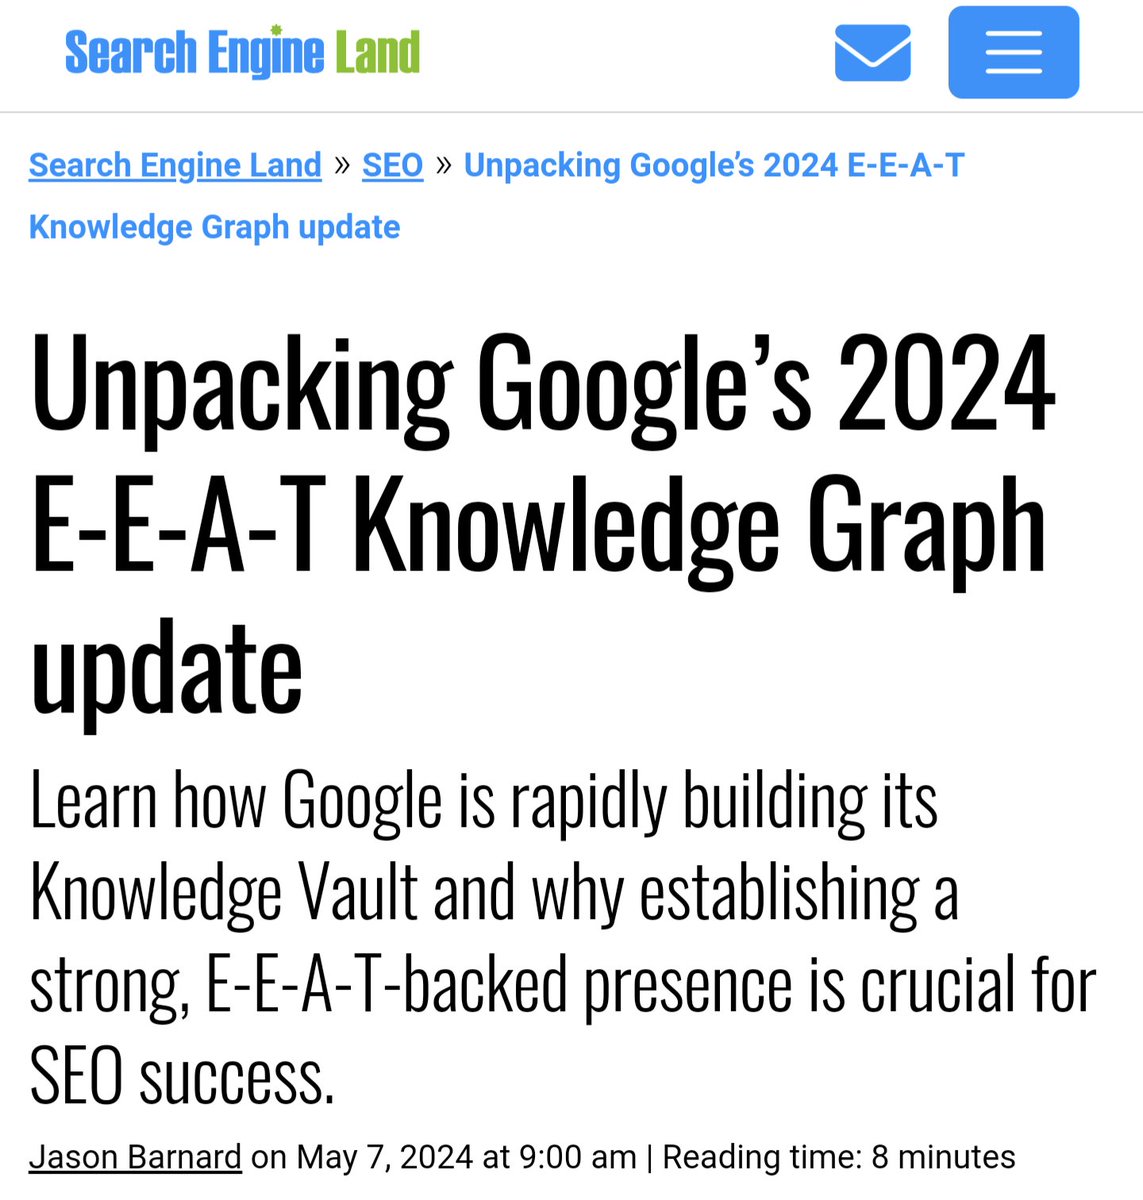 Oh there was an update in Google's Knowledge Graph in March as well -  'the number of Person entities in the Knowledge Graph increased by 17%' via @jasonmbarnard 🙌🙌
searchengineland.com/unpacking-goog…